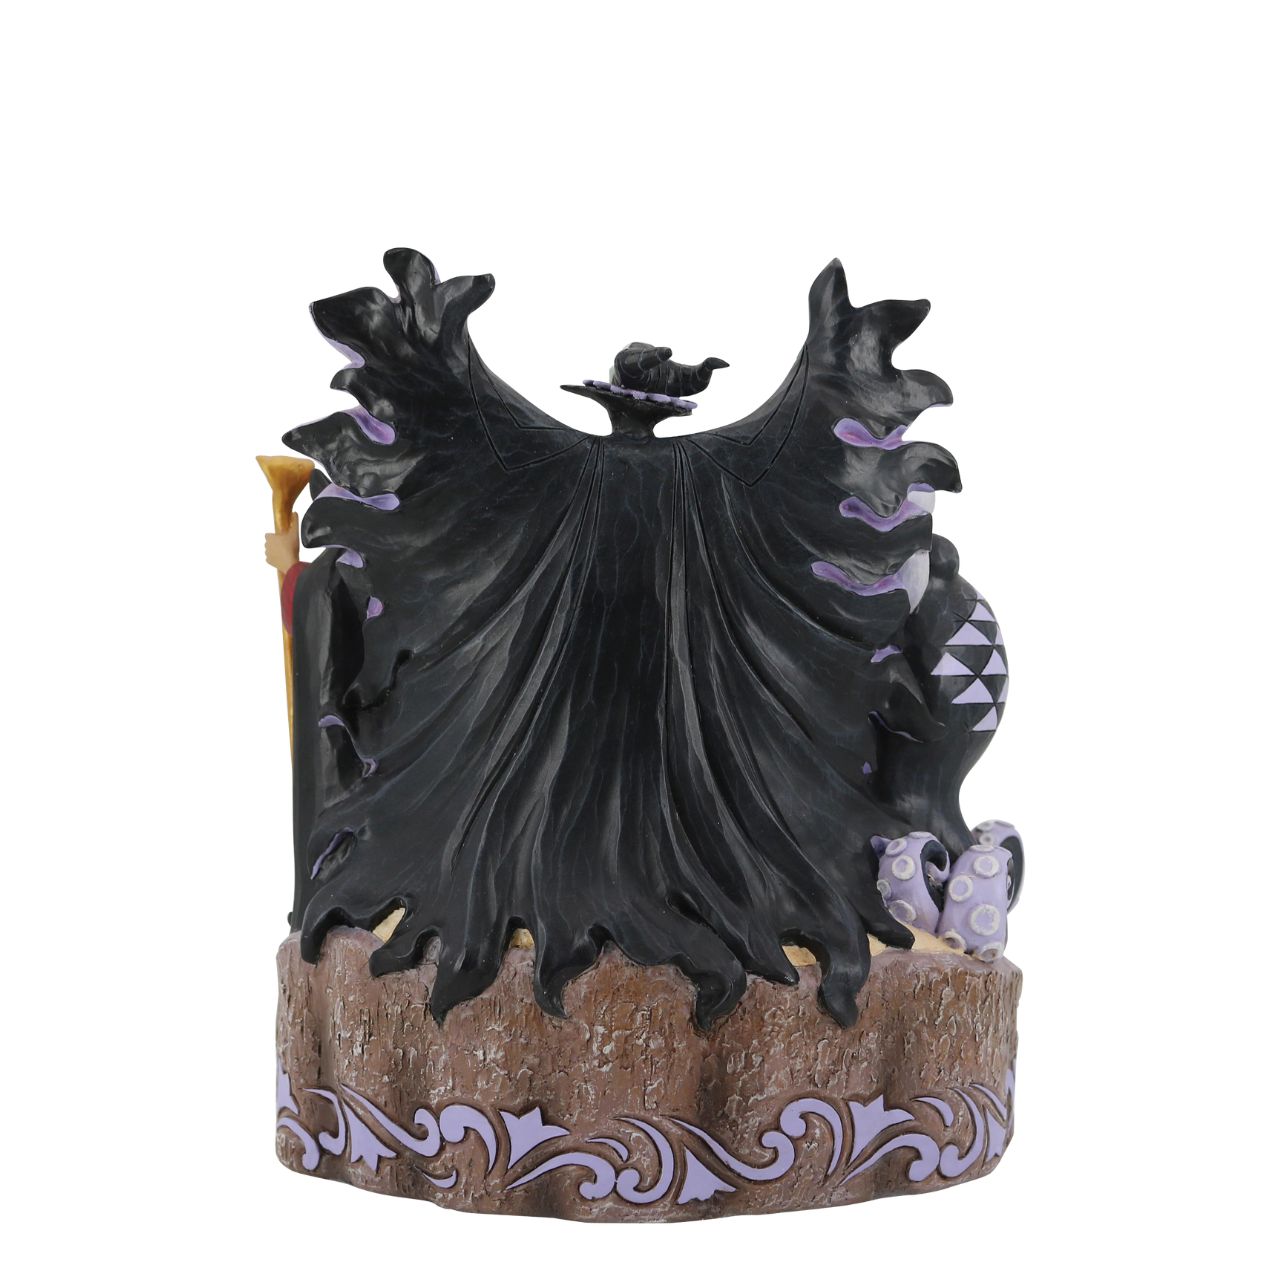 Jim Shore continues his Carved by Heart series paying homage to Disney Villains. Designed by award-winning artist and sculptor, Jim Shore for the Disney Tradition brand. The figurine is made from resin.